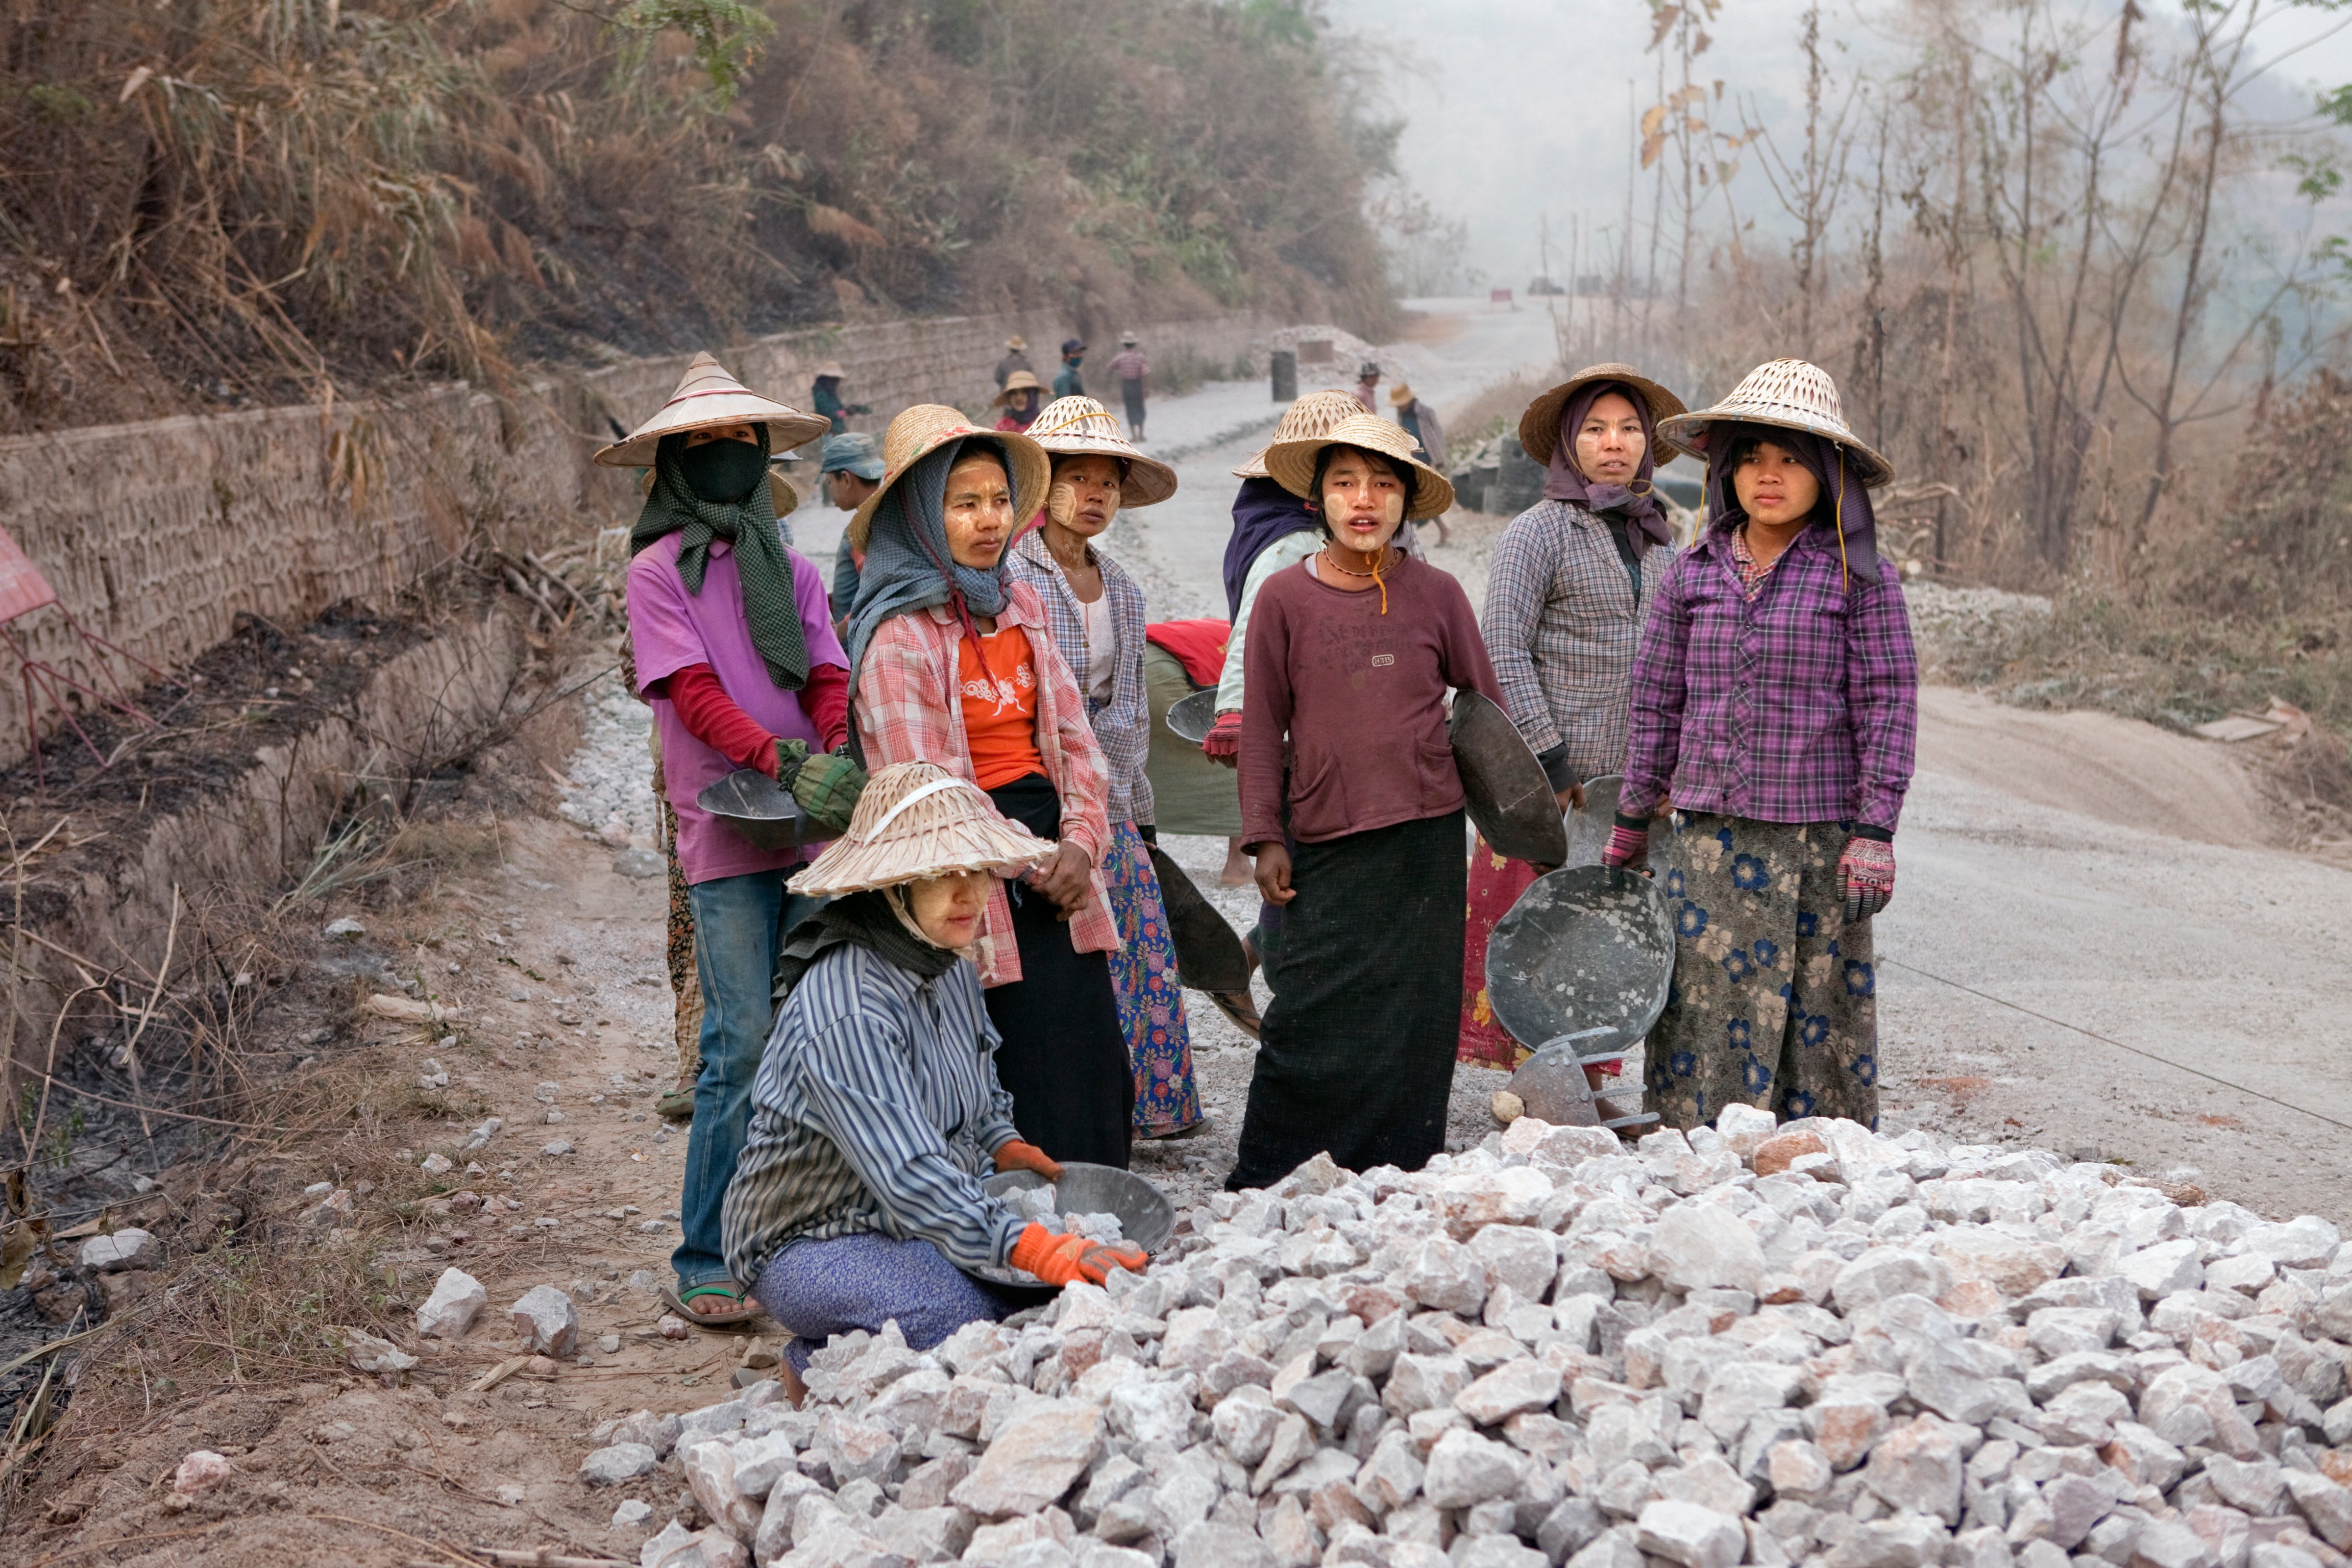 Forced female and child labor in Myanmar